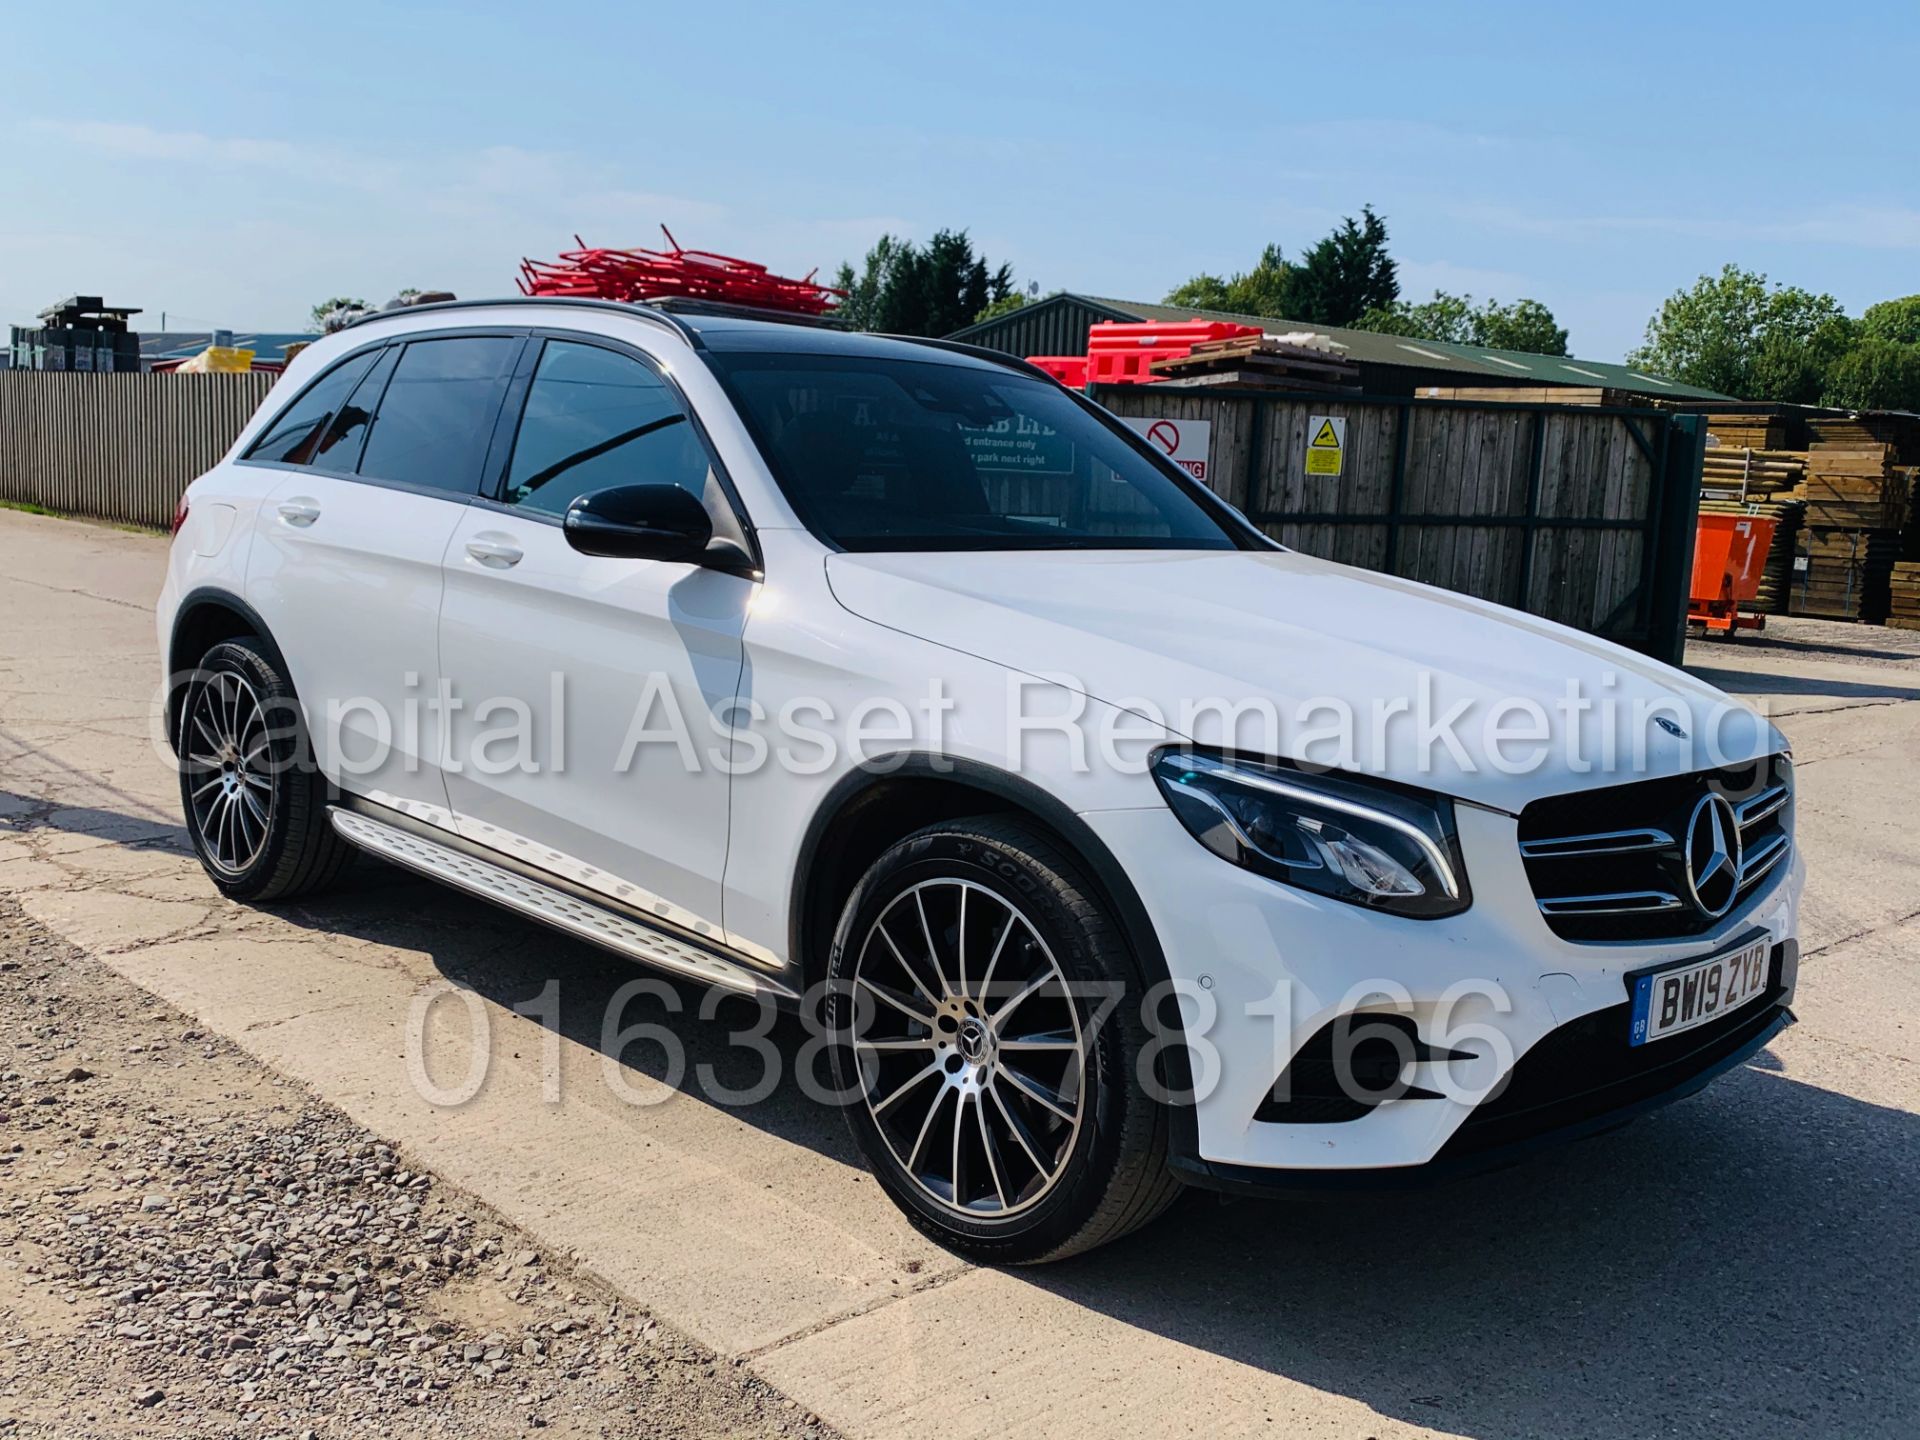 (On Sale) MERCEDES-BENZ GLC 250 *AMG - NIGHT EDITION* SUV (2019) '9G TRONIC - 4-MATIC' *HUGE SPEC* - Image 3 of 53